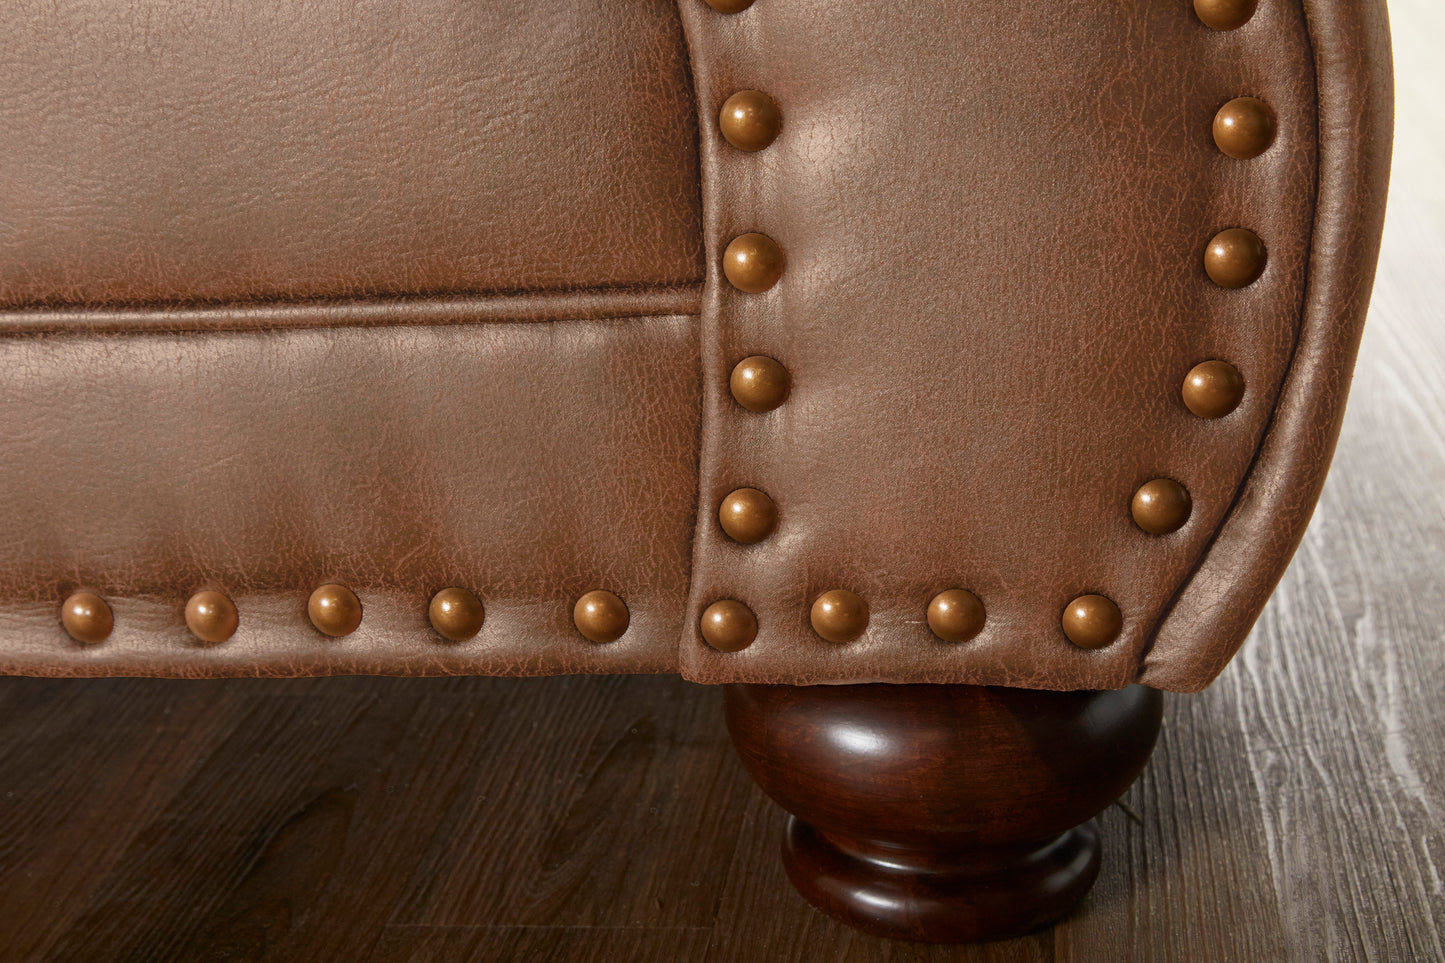 Leinster Faux Leather Living Room Collection with Antique Bronze Nailheads in Jetson Ginger